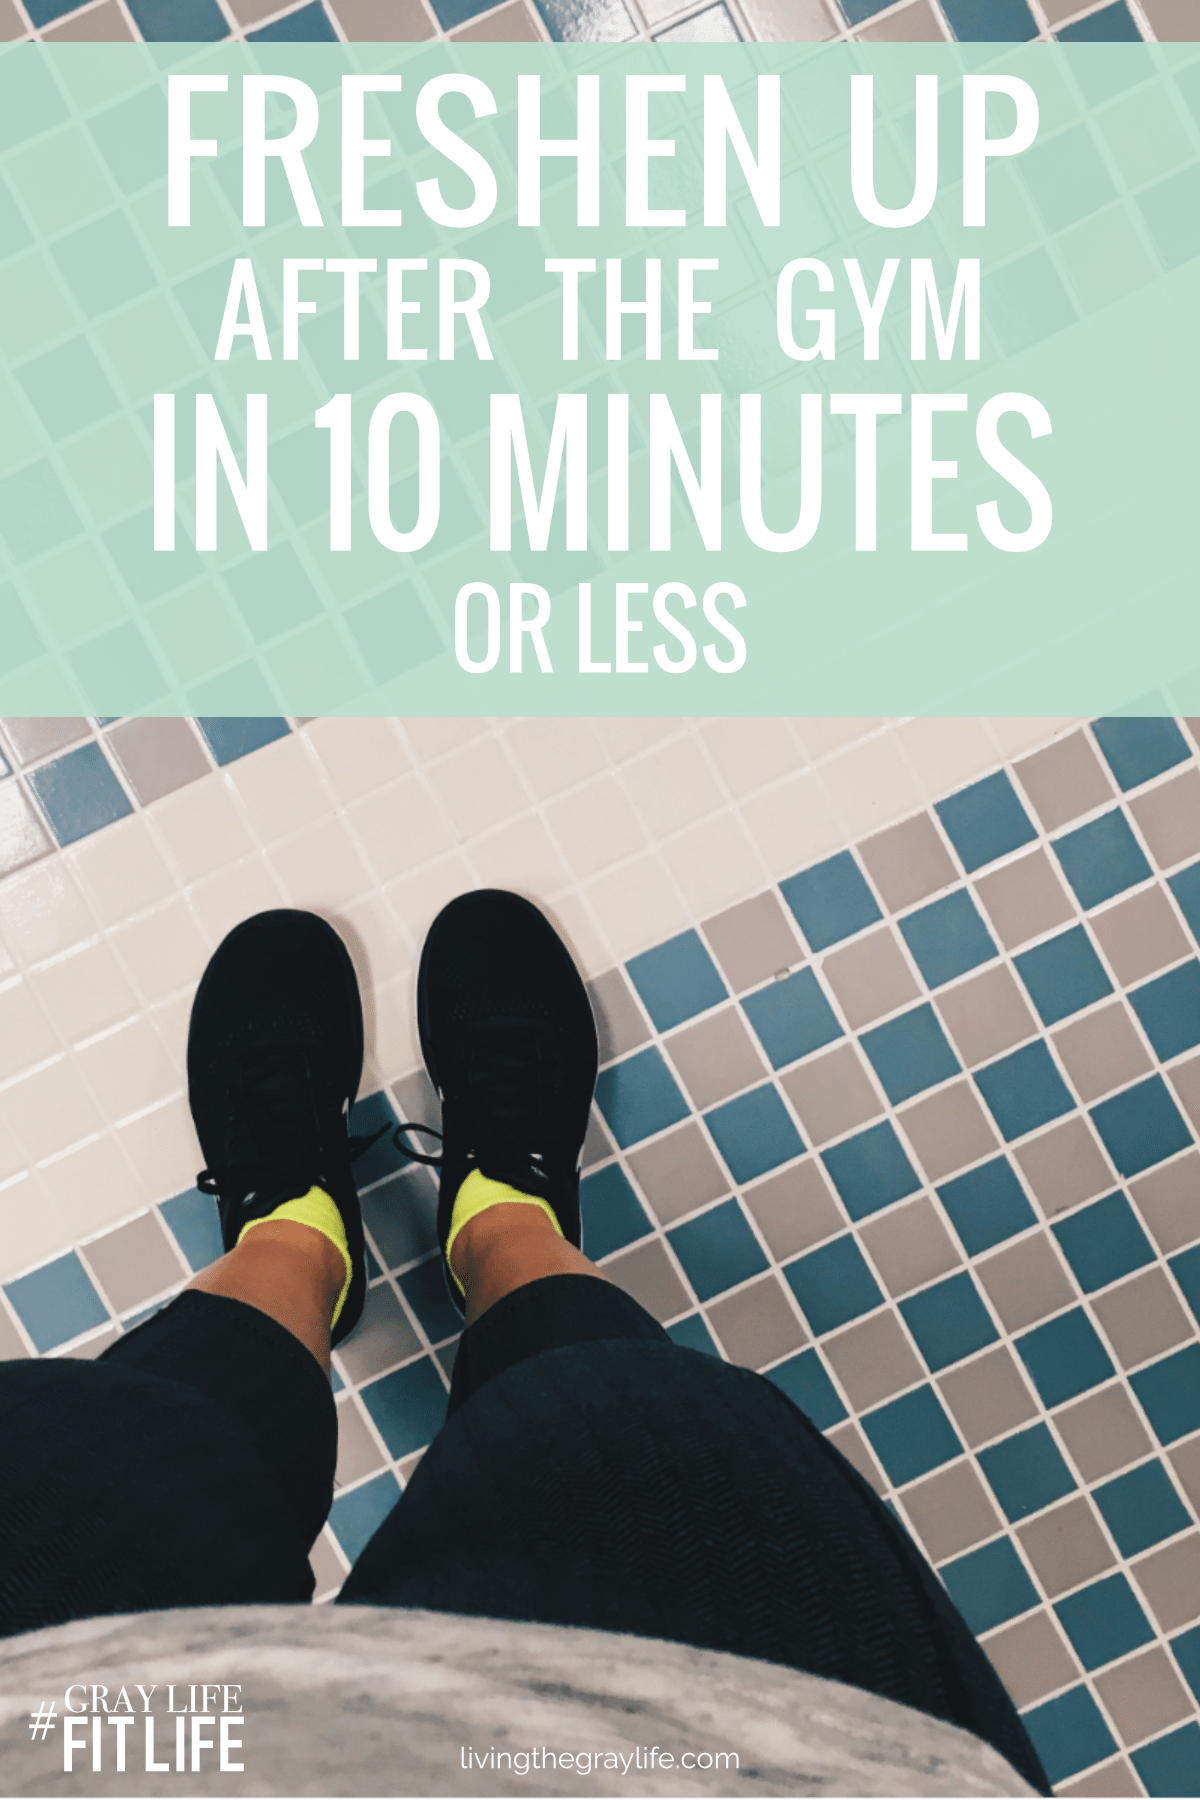 Think you don't have time for the gym because you don't have time to shower after your workout? Wrong. This simple 10-minute gym routine will get you in and out of the gym in no time!